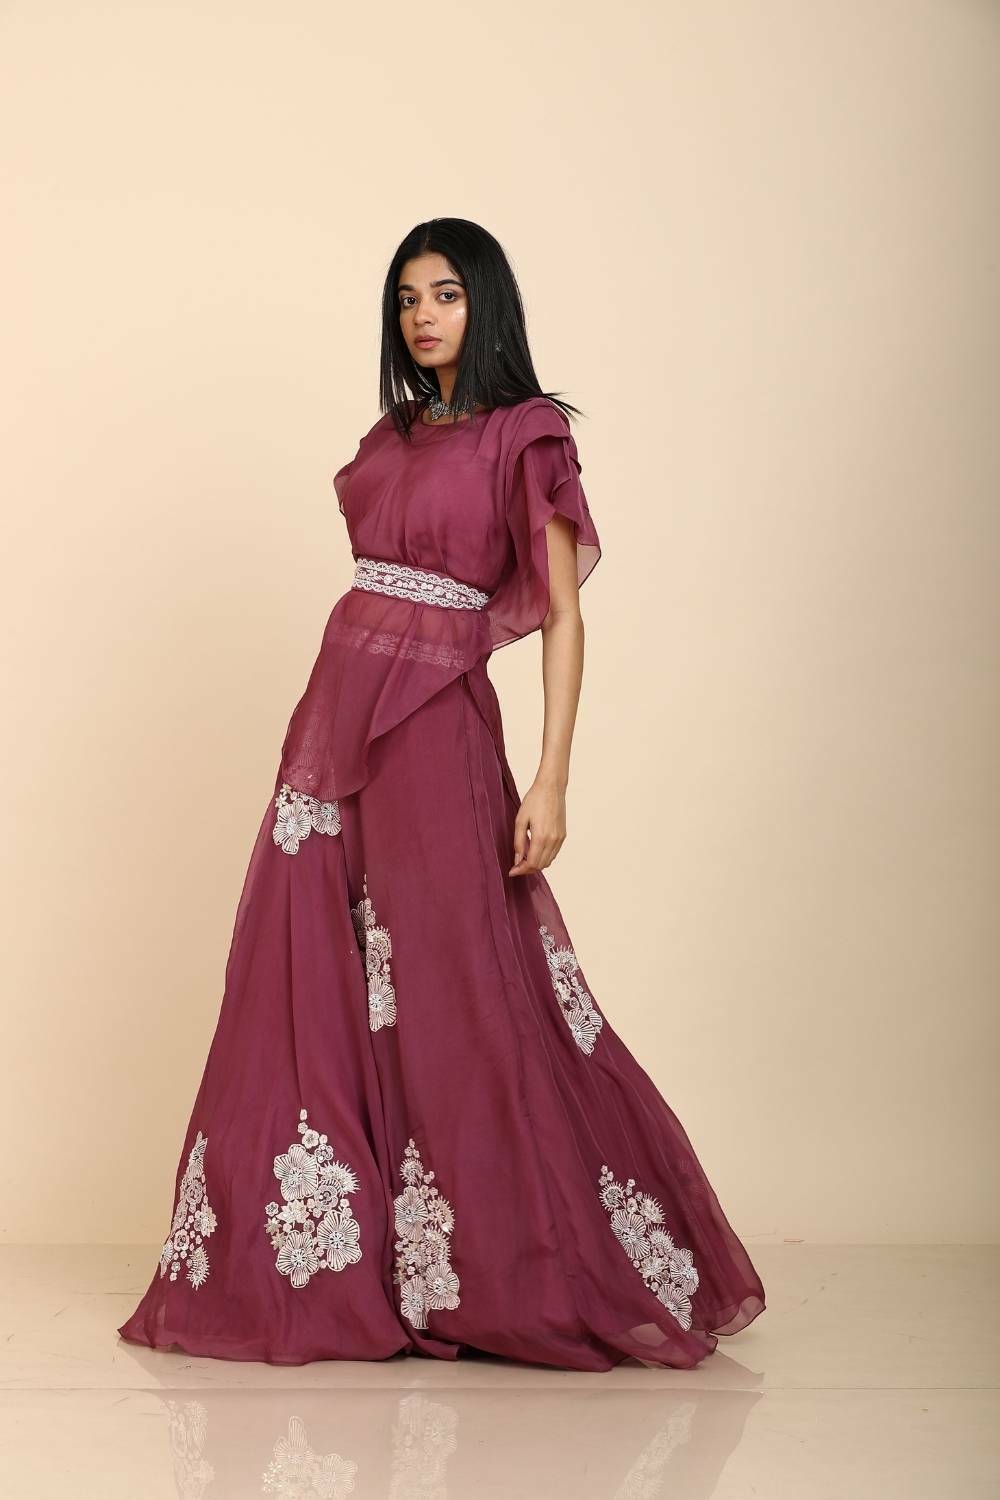 Plum organza layered top with skirt resham and mirror embroidery